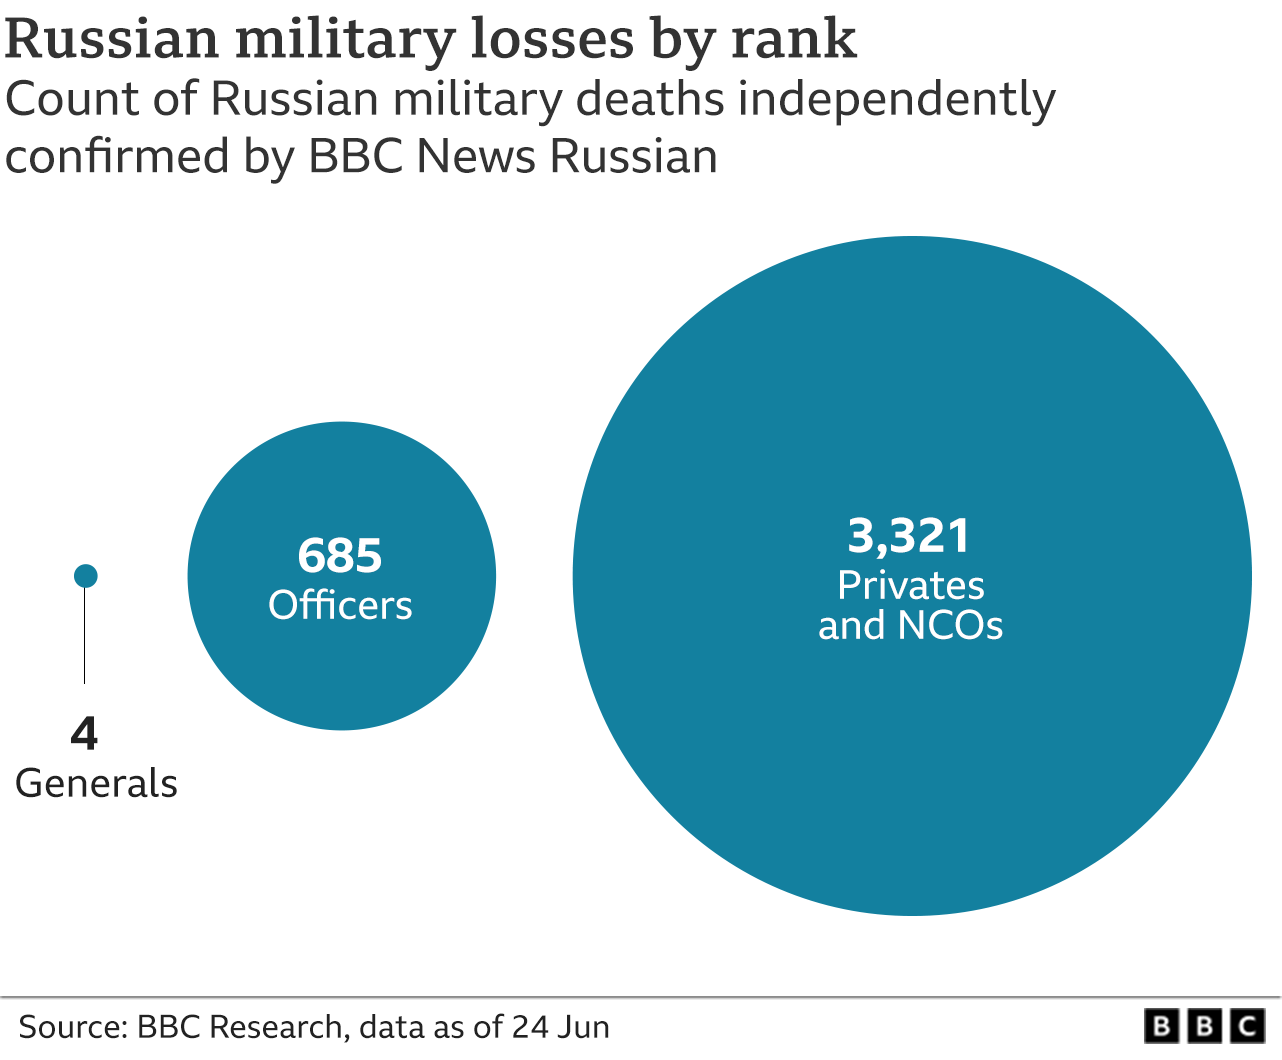 Chart visualising the difference between Russian military casualties by rank using original data independently confirmed by the BBC Russian Service. Only 4 Russian generals are confirmed to have died and 685 officers, but 3,321 privates and non-commissioned officers.